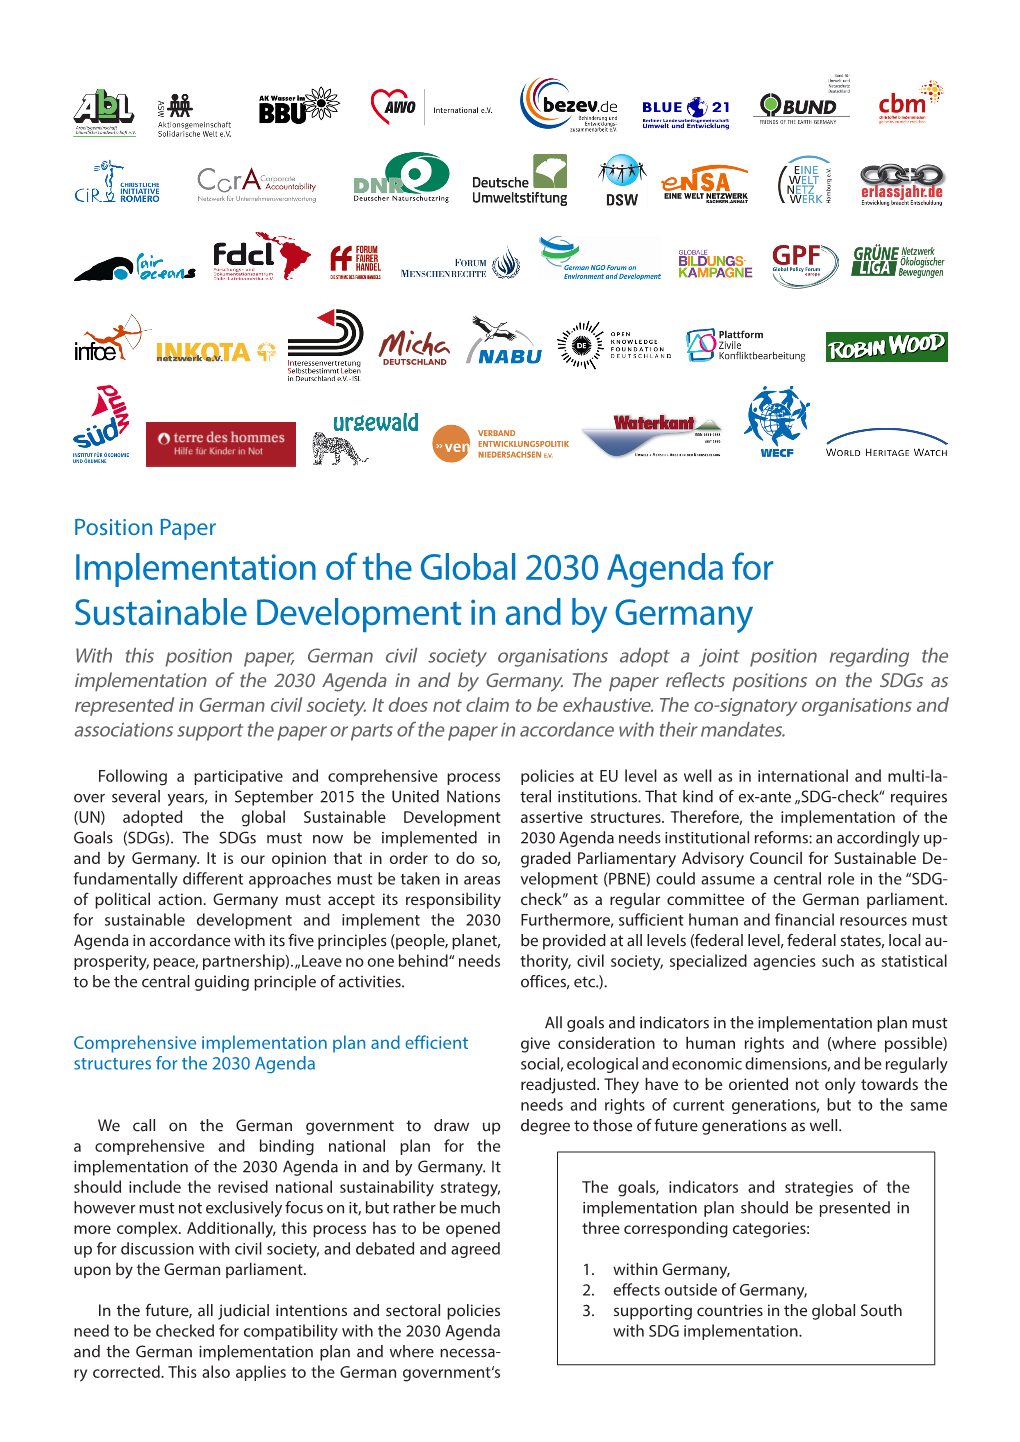 Implementation of the Global 2030 Agenda for Sustainable